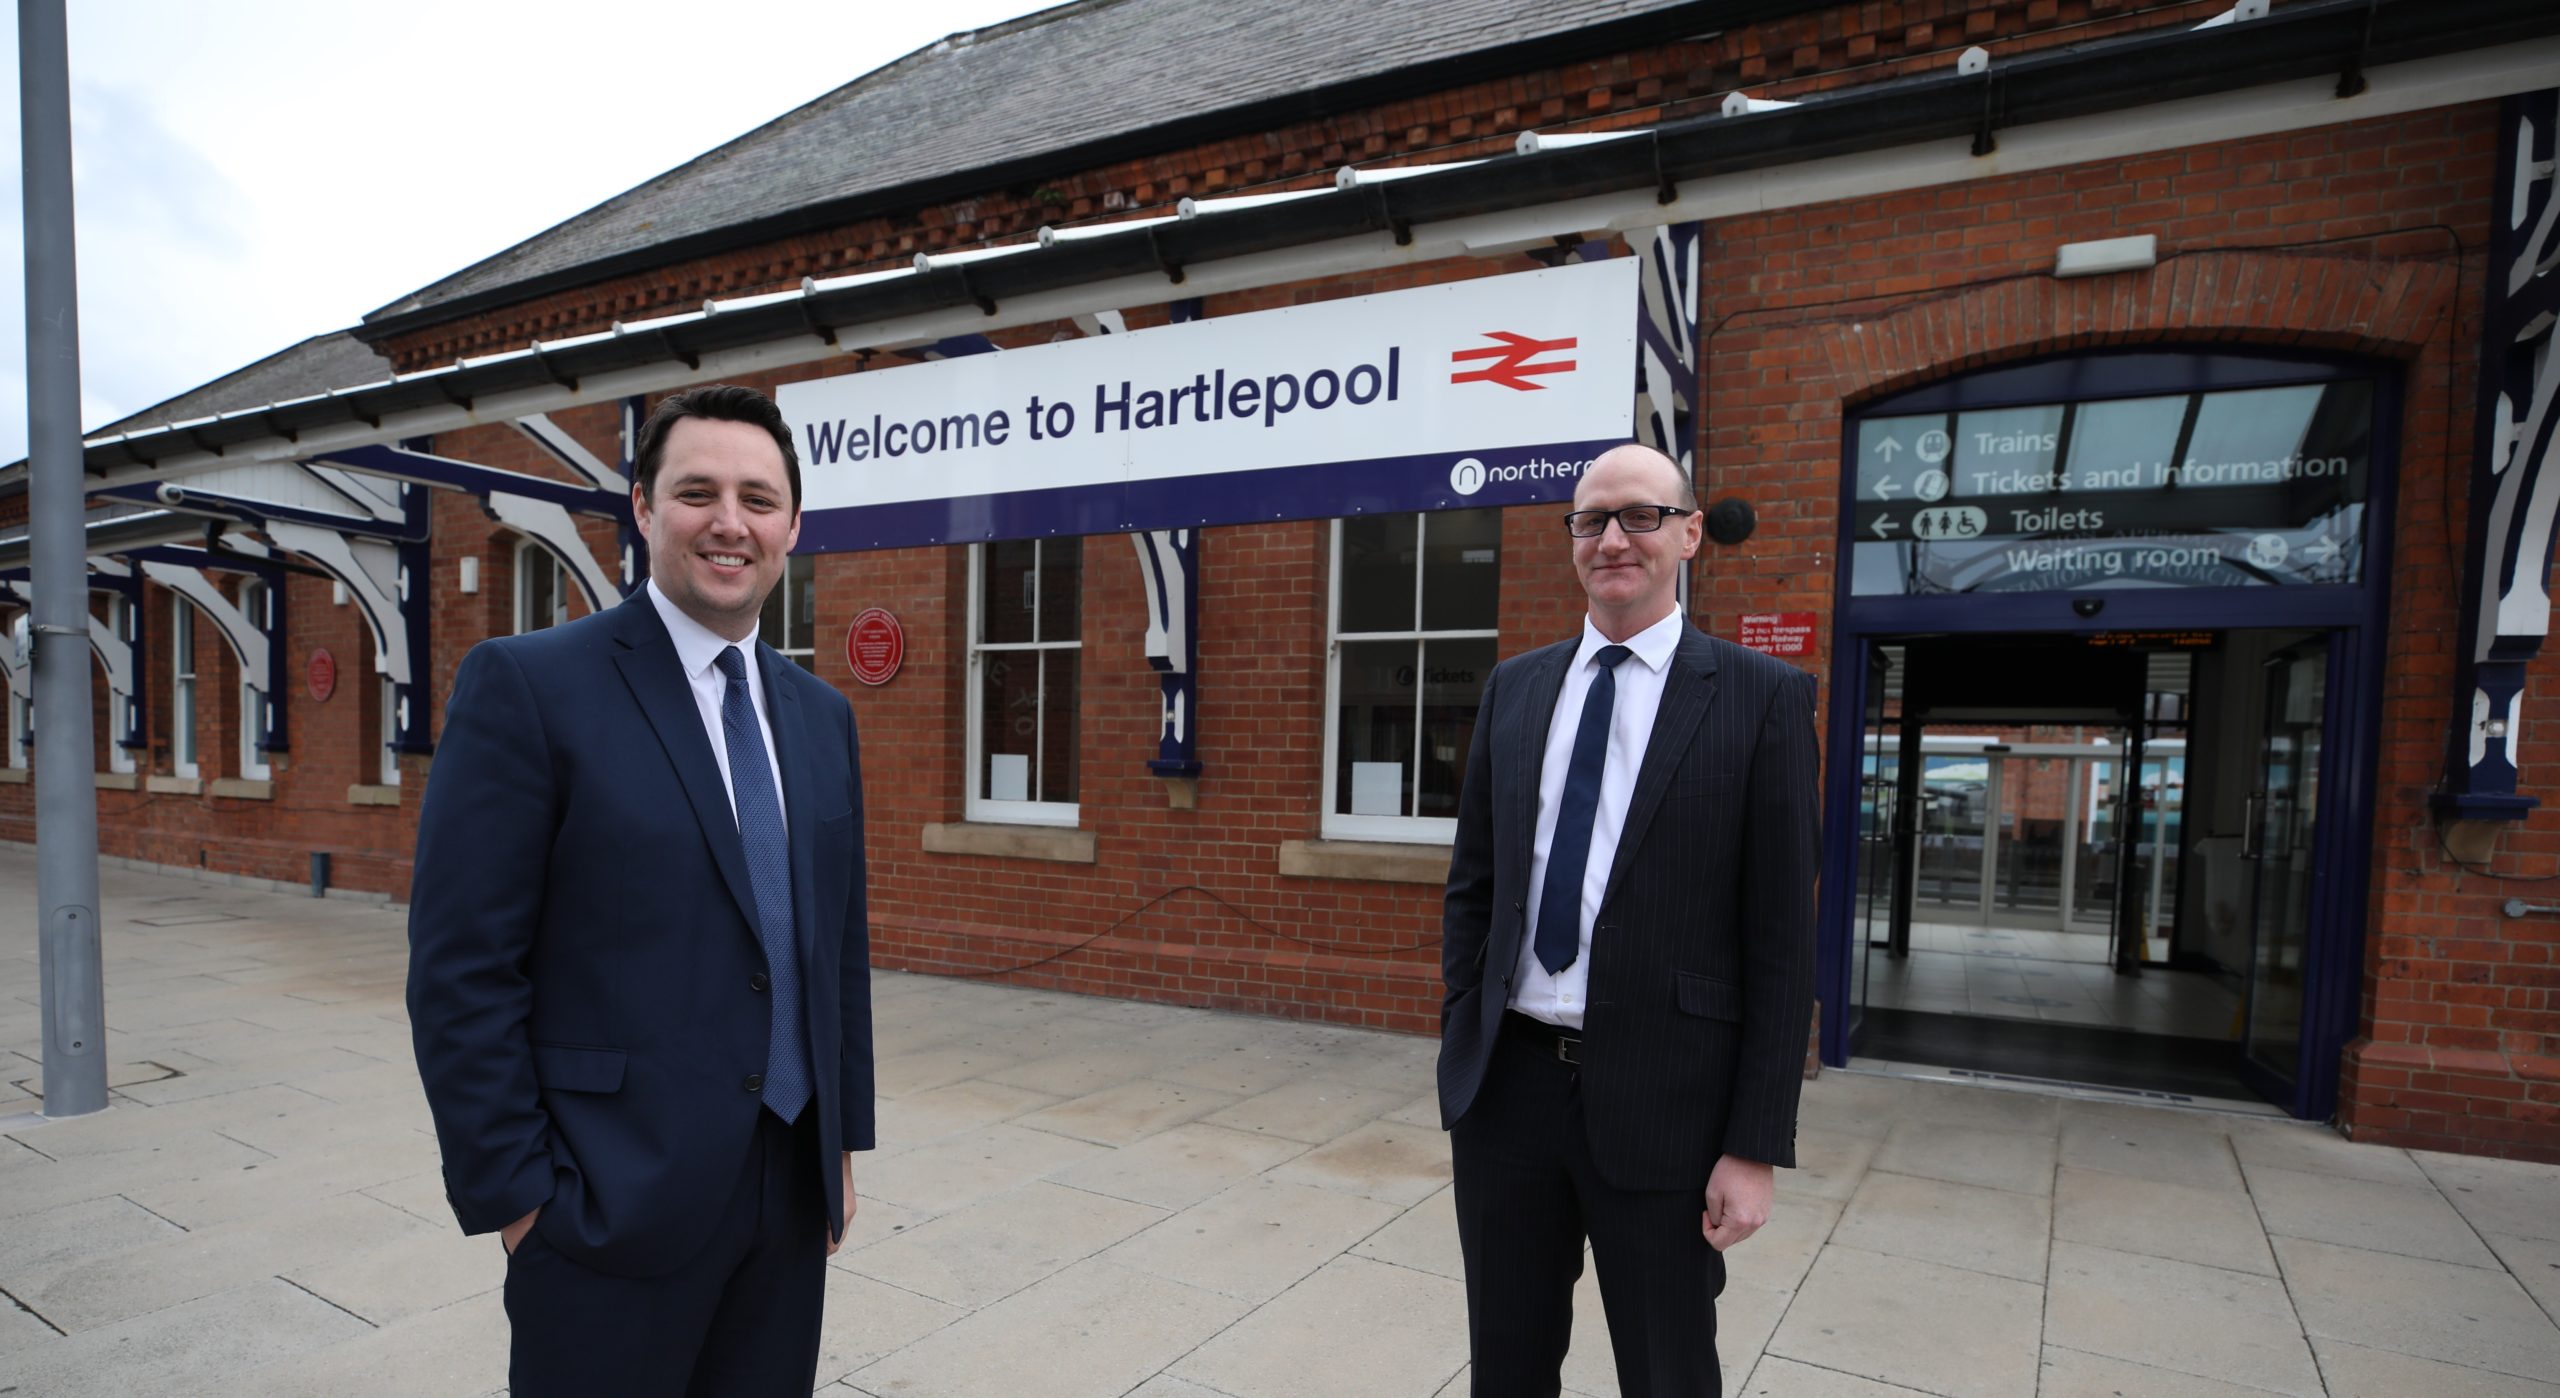 Tees Valley Mayor Ben Houchen and Cllr Shane Moore at Hartlepool Station